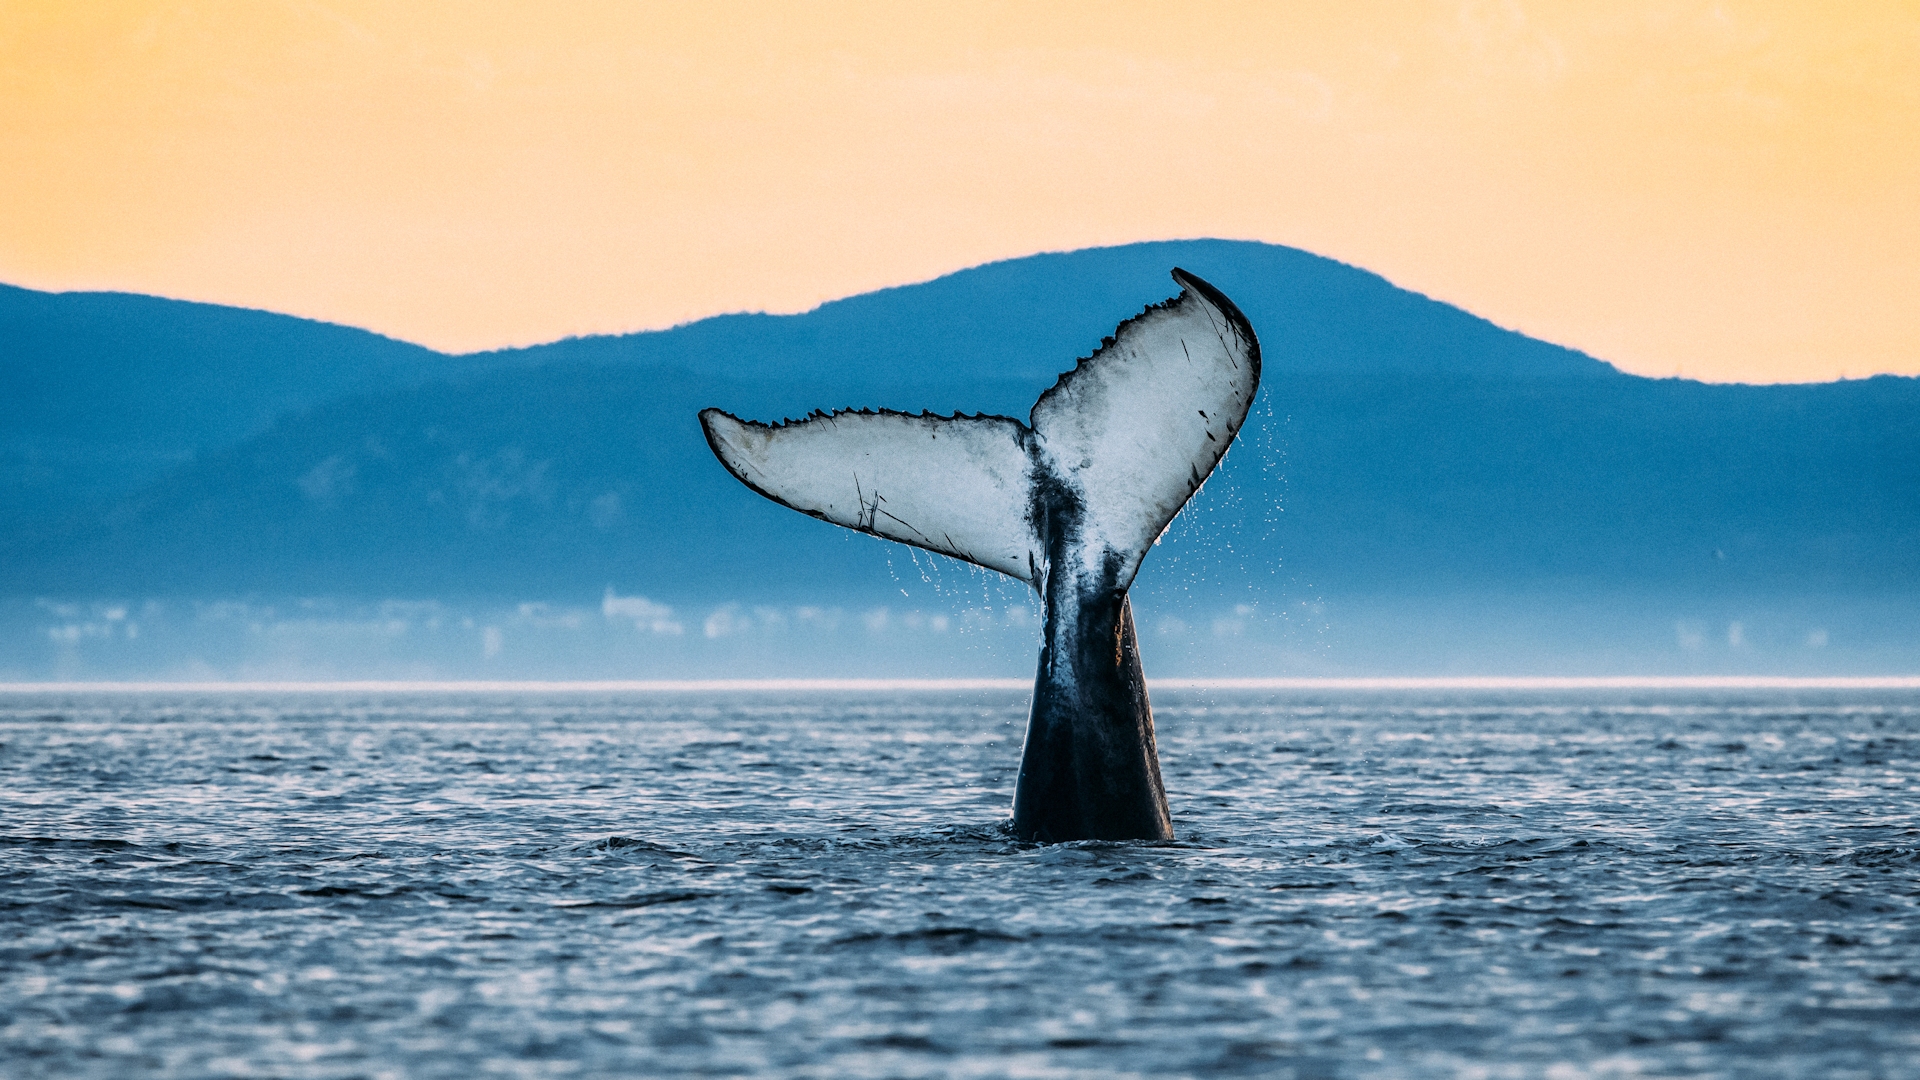 Whale in Saguenay – St. Lawrence Marine Park